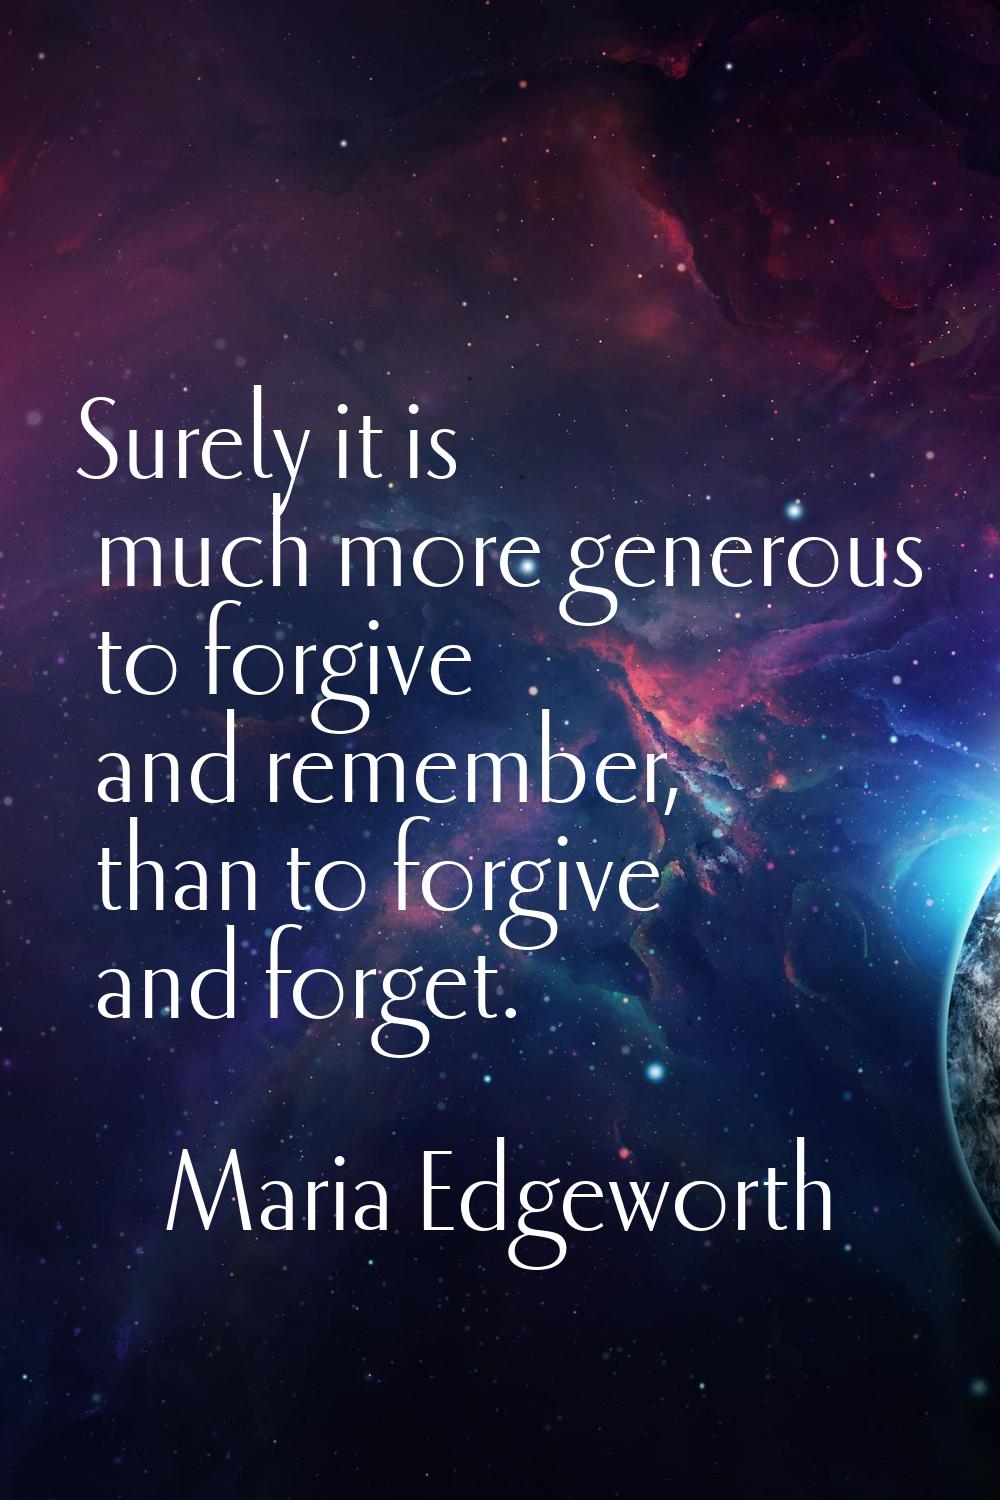 Surely it is much more generous to forgive and remember, than to forgive and forget.